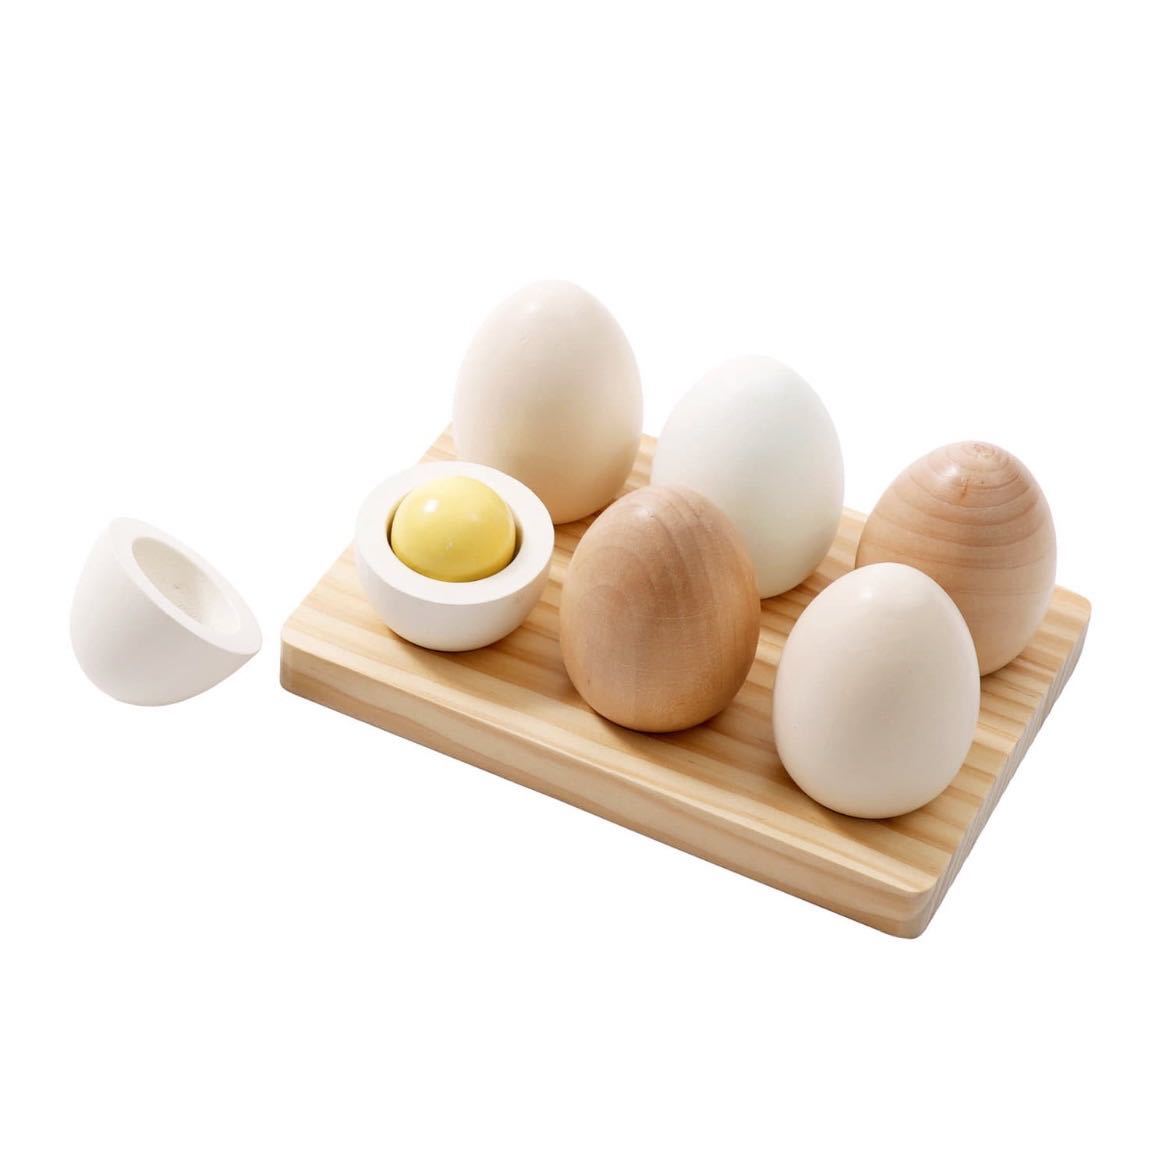 3COINSs Lee coin z toy Tama . wooden egg refrigerator interior toy loading tree intellectual training toy baby Kids Korea natural tree 